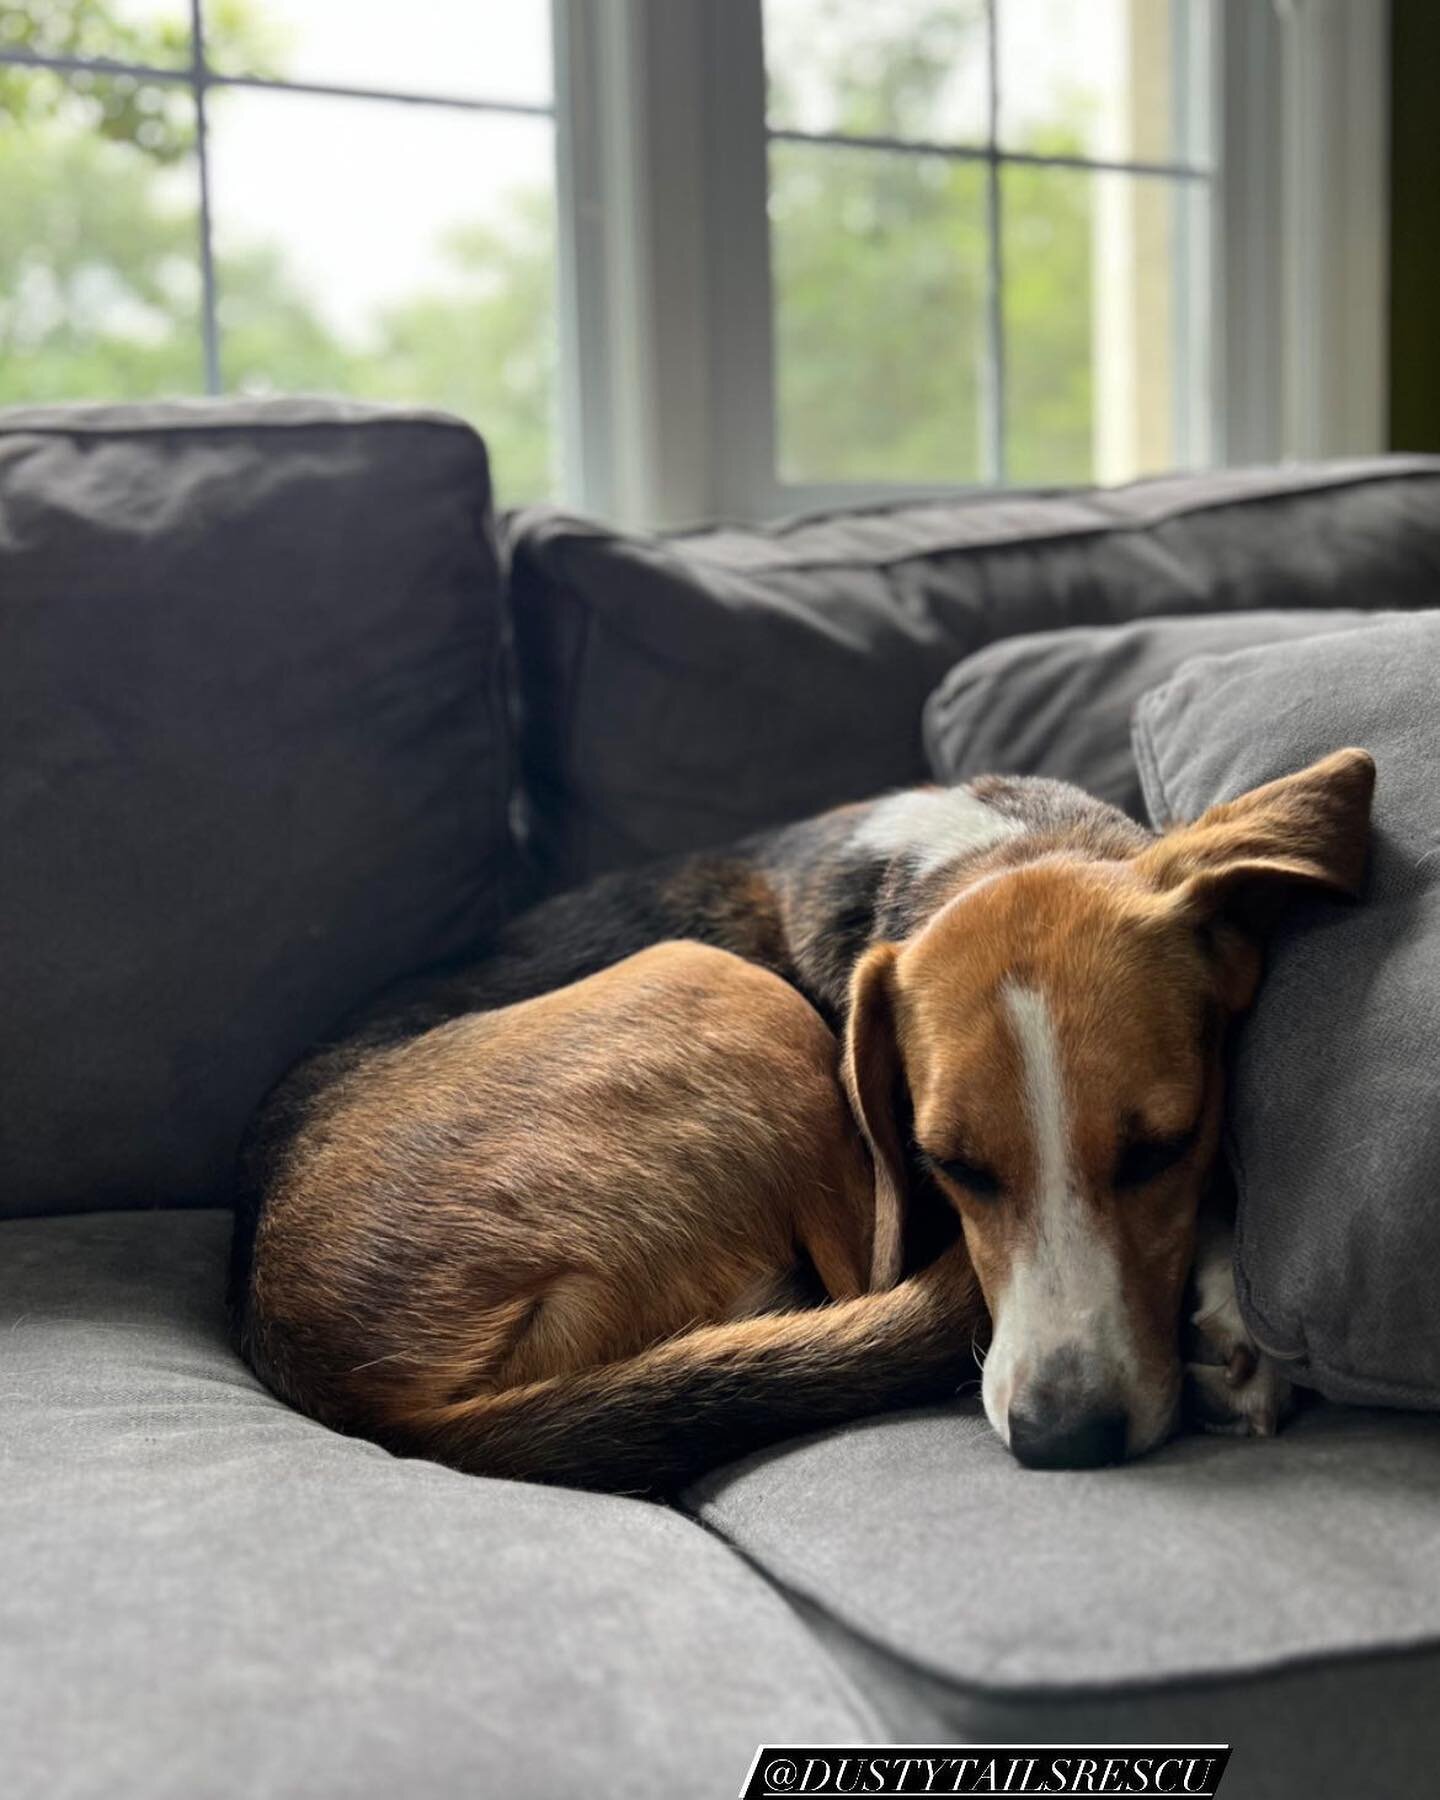 Celebrating National Rescue Dog Day by highlighting one of two long timers, Miss Apple Pie! Apple Pie is a stunning hound lady who&rsquo;s around 6 years old and found herself in a rural shelter with little hope of ever making it out. Sadly the South